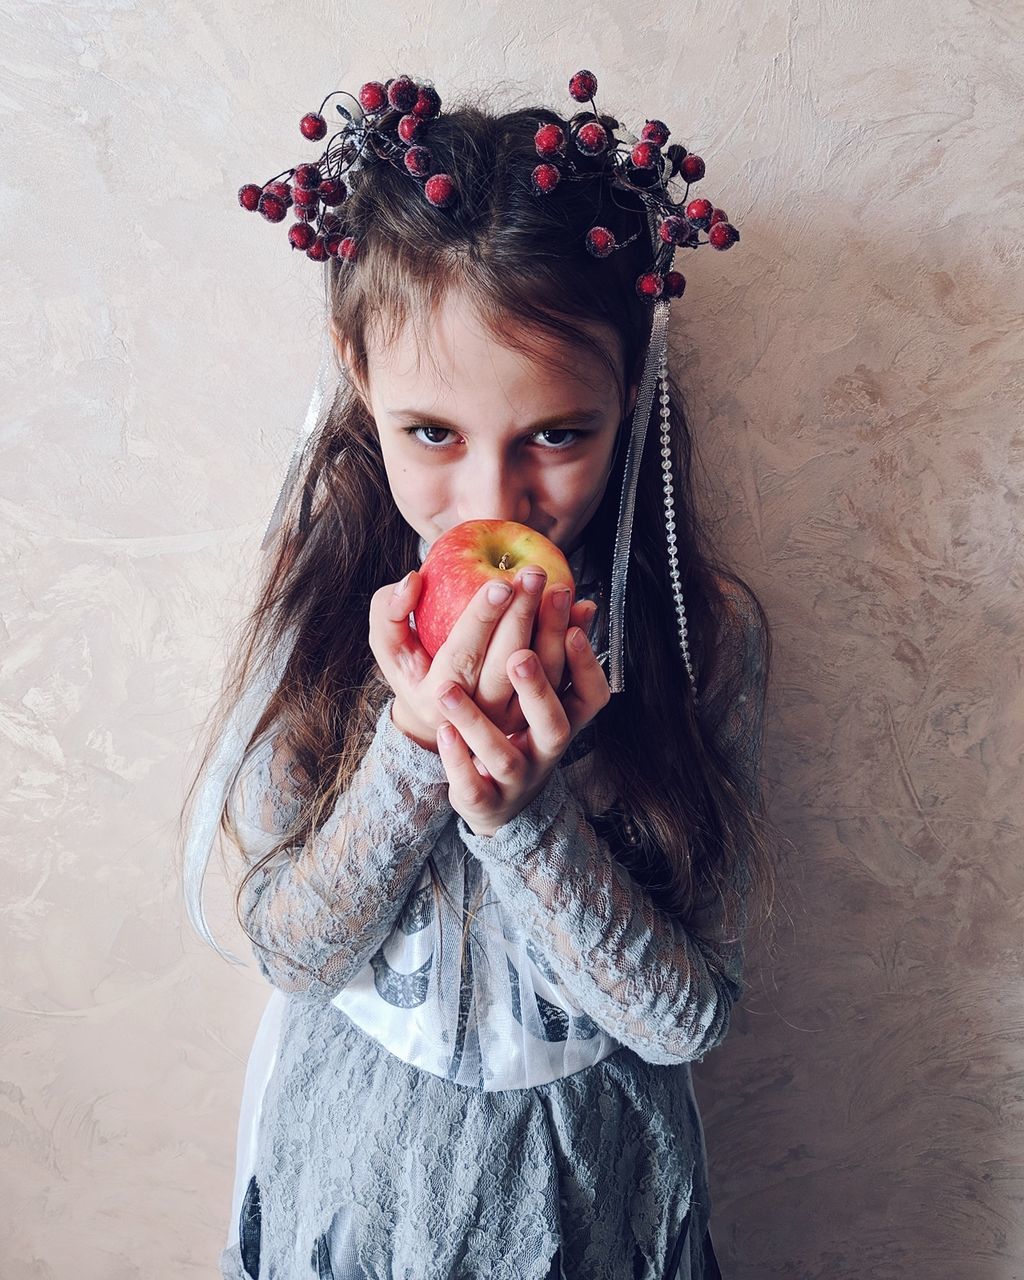 PORTRAIT OF WOMAN HOLDING STRAWBERRY AGAINST WALL